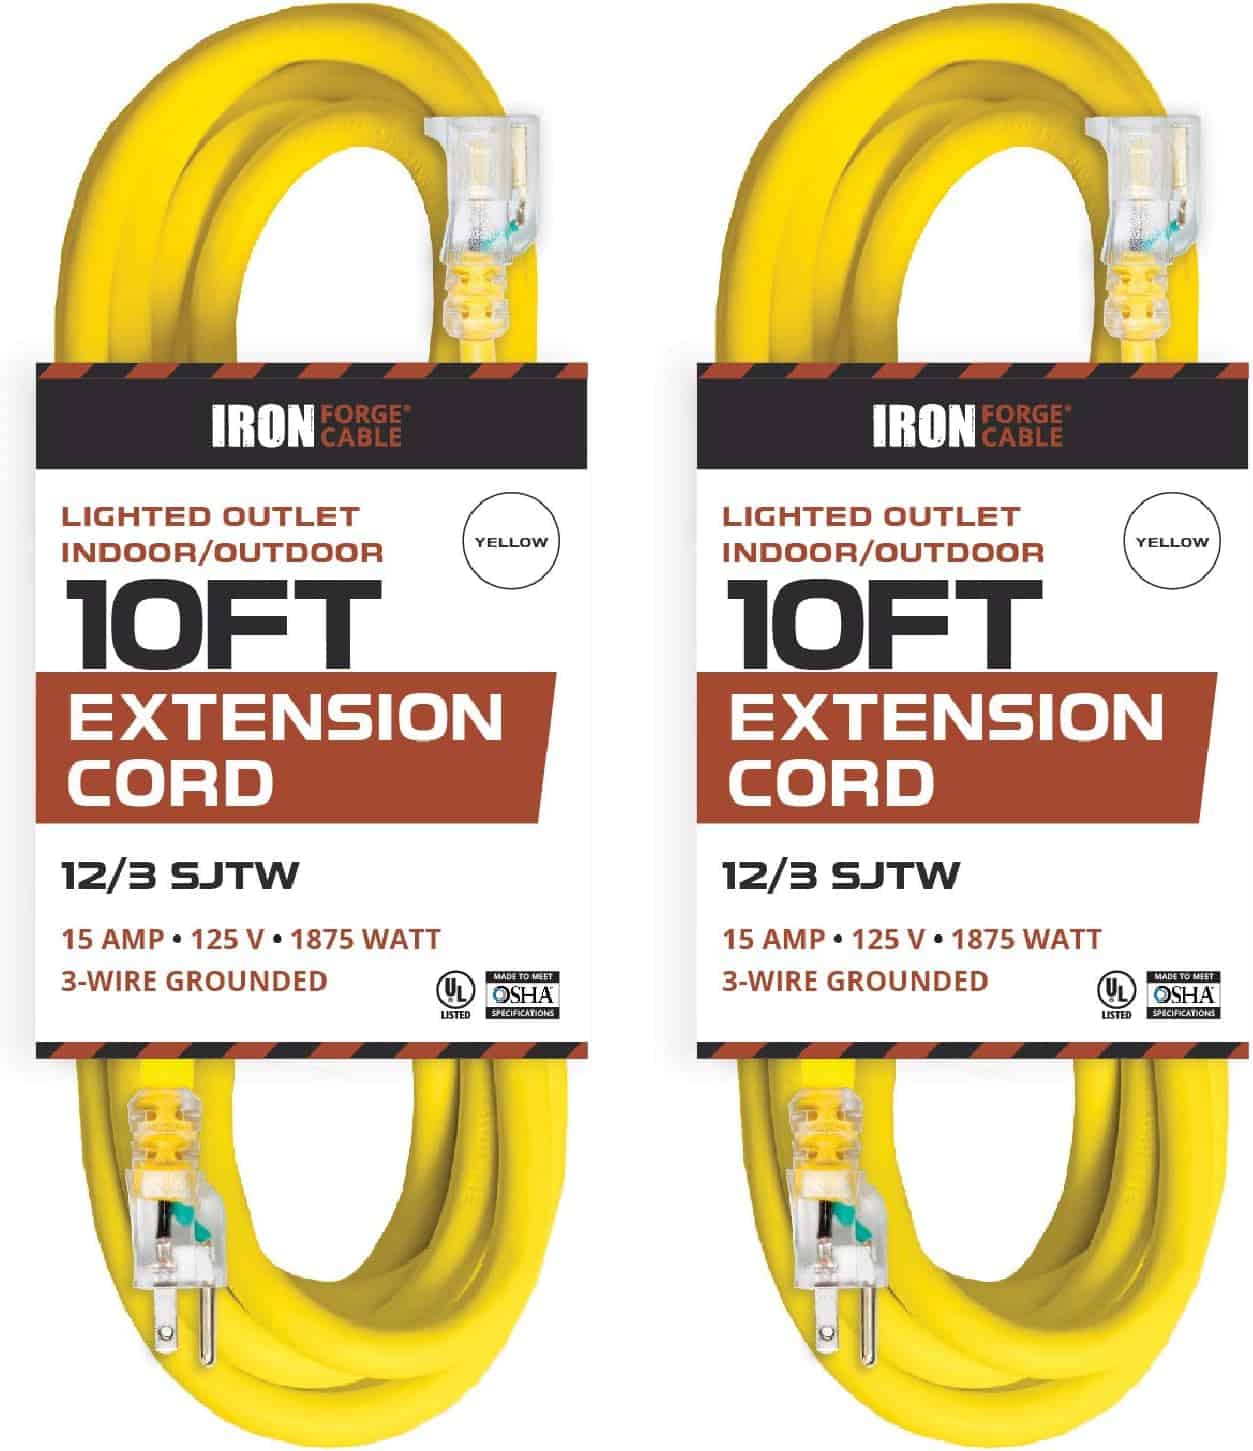 IRON-FORGE-CABLE-2-Pack-of-10-Foot-Outdoor-Extension-Cords-12-3-SJTW-Heavy-Duty-Lighted-Yellow-Extension-Cable-Set-15-AMP